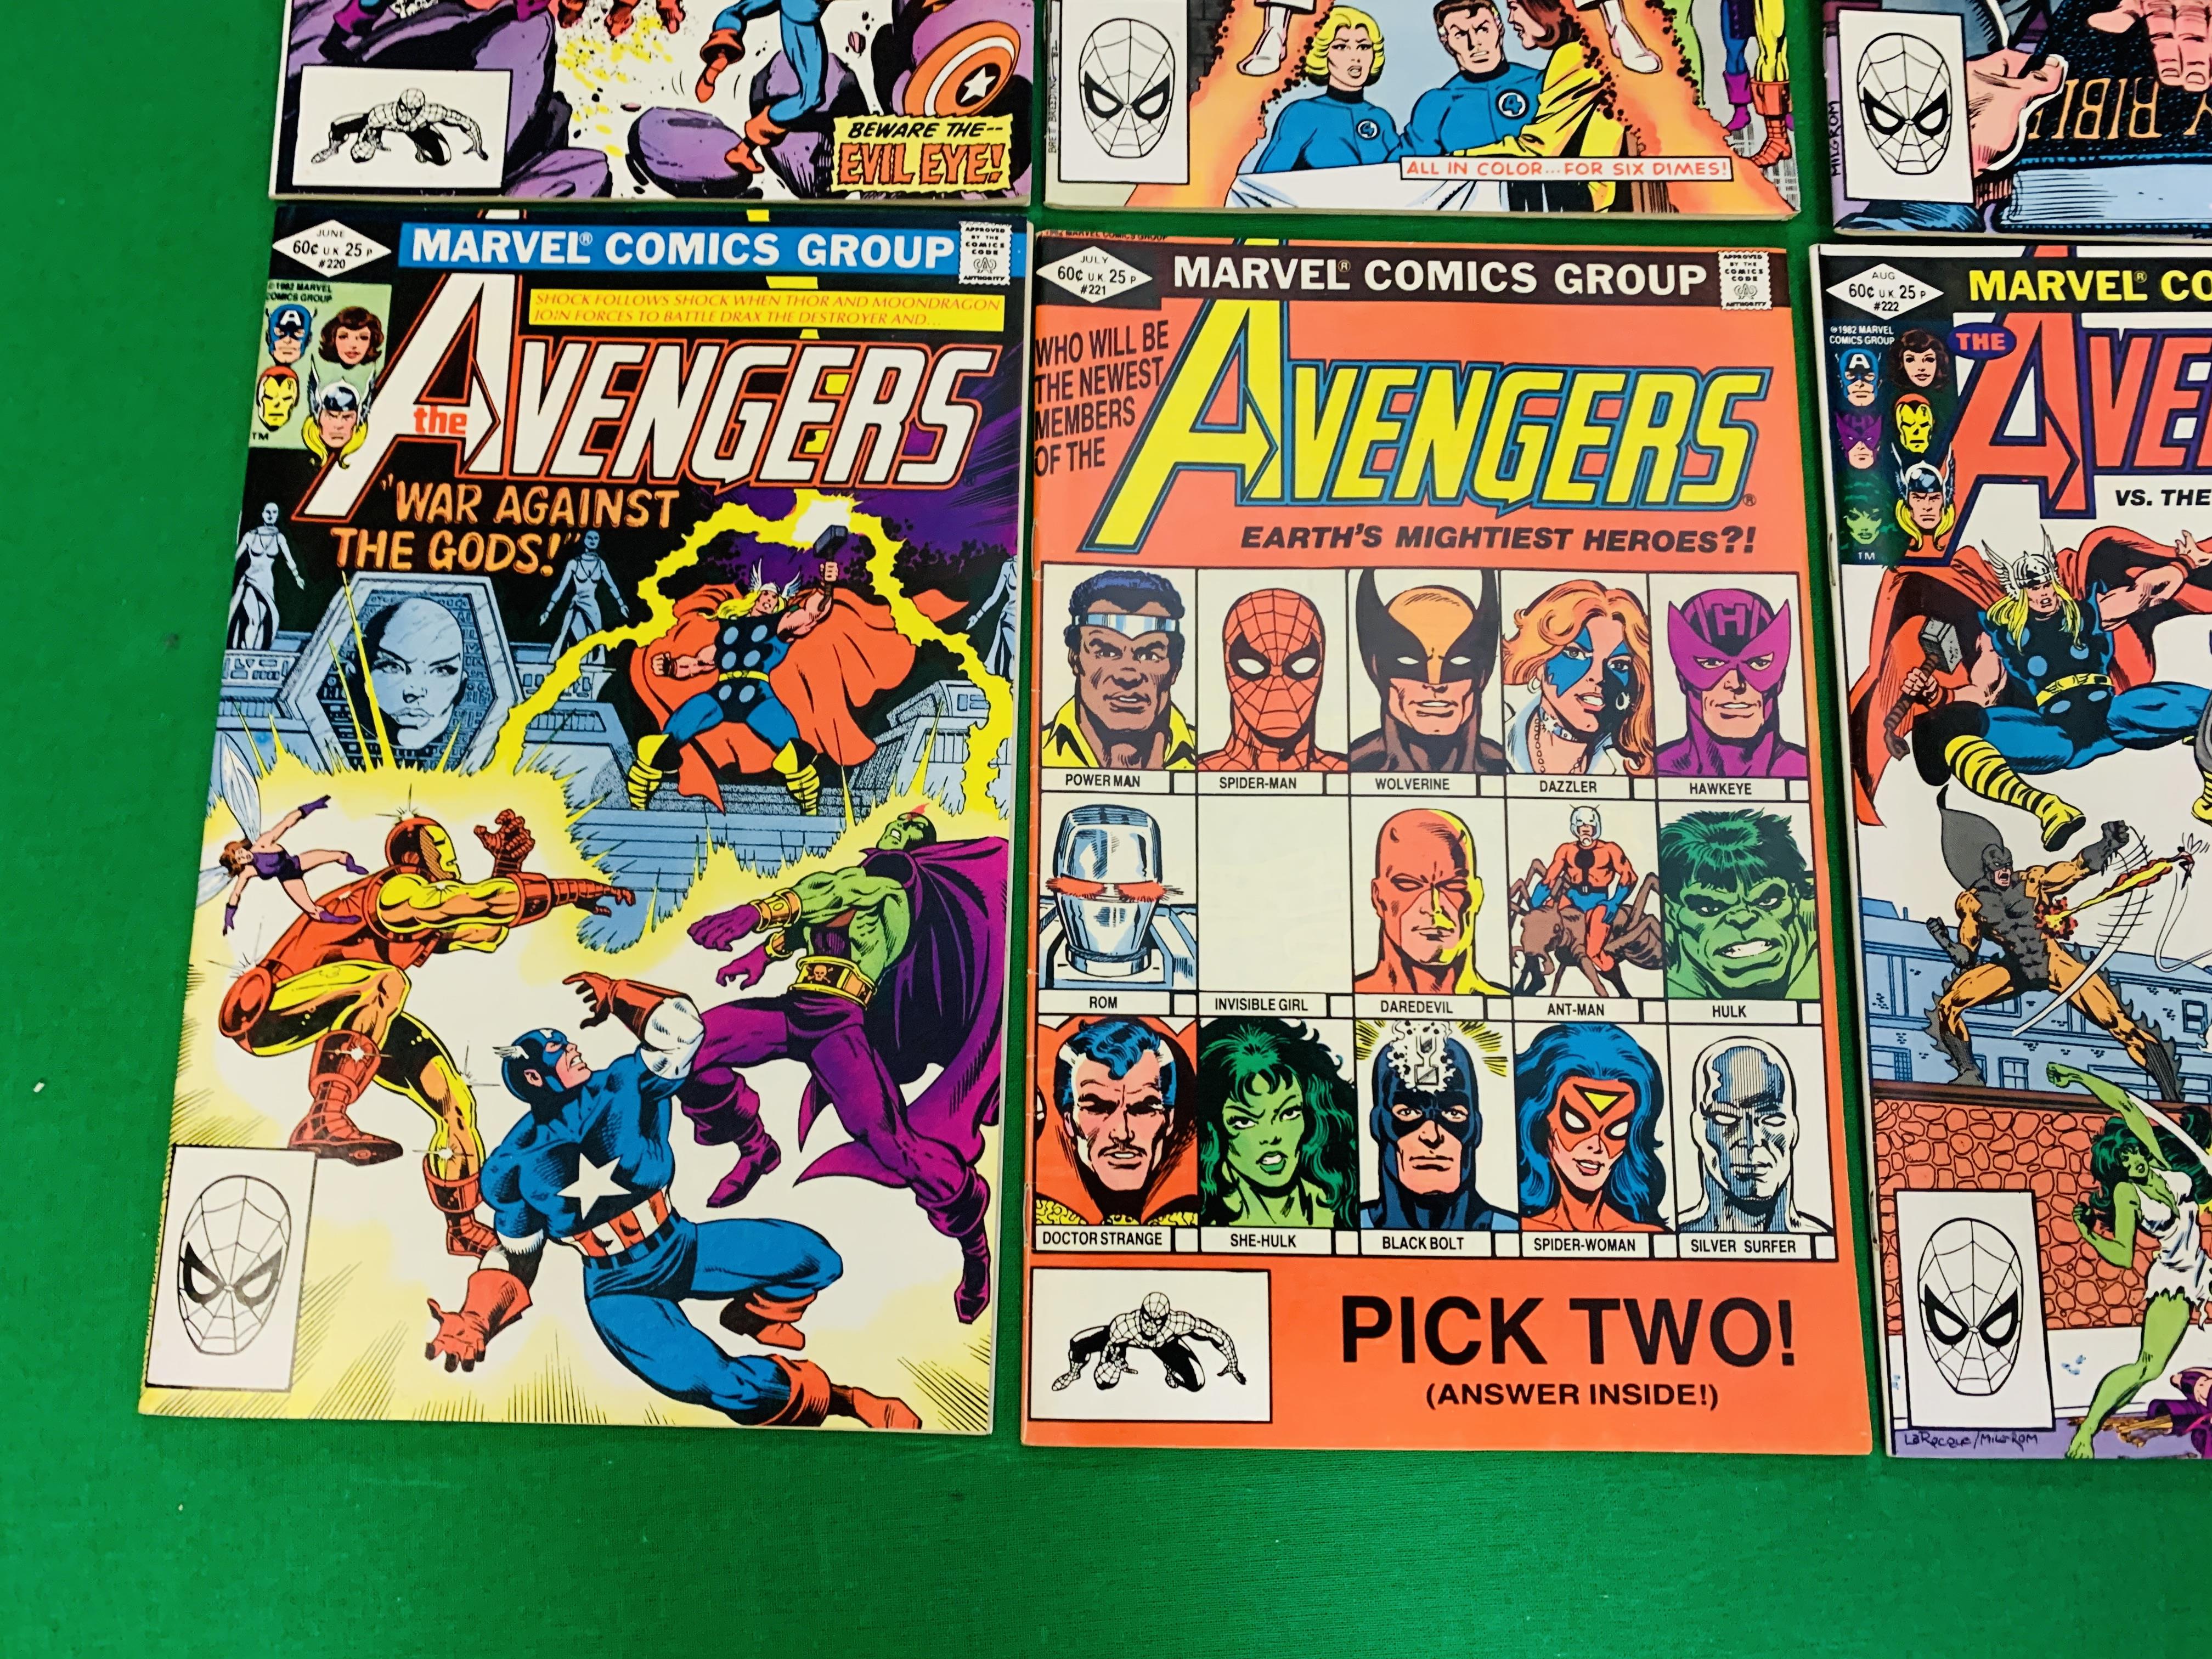 MARVEL COMICS THE AVENGERS NO. 101 - 299, MISSING ISSUES 103 AND 110. - Image 87 of 130